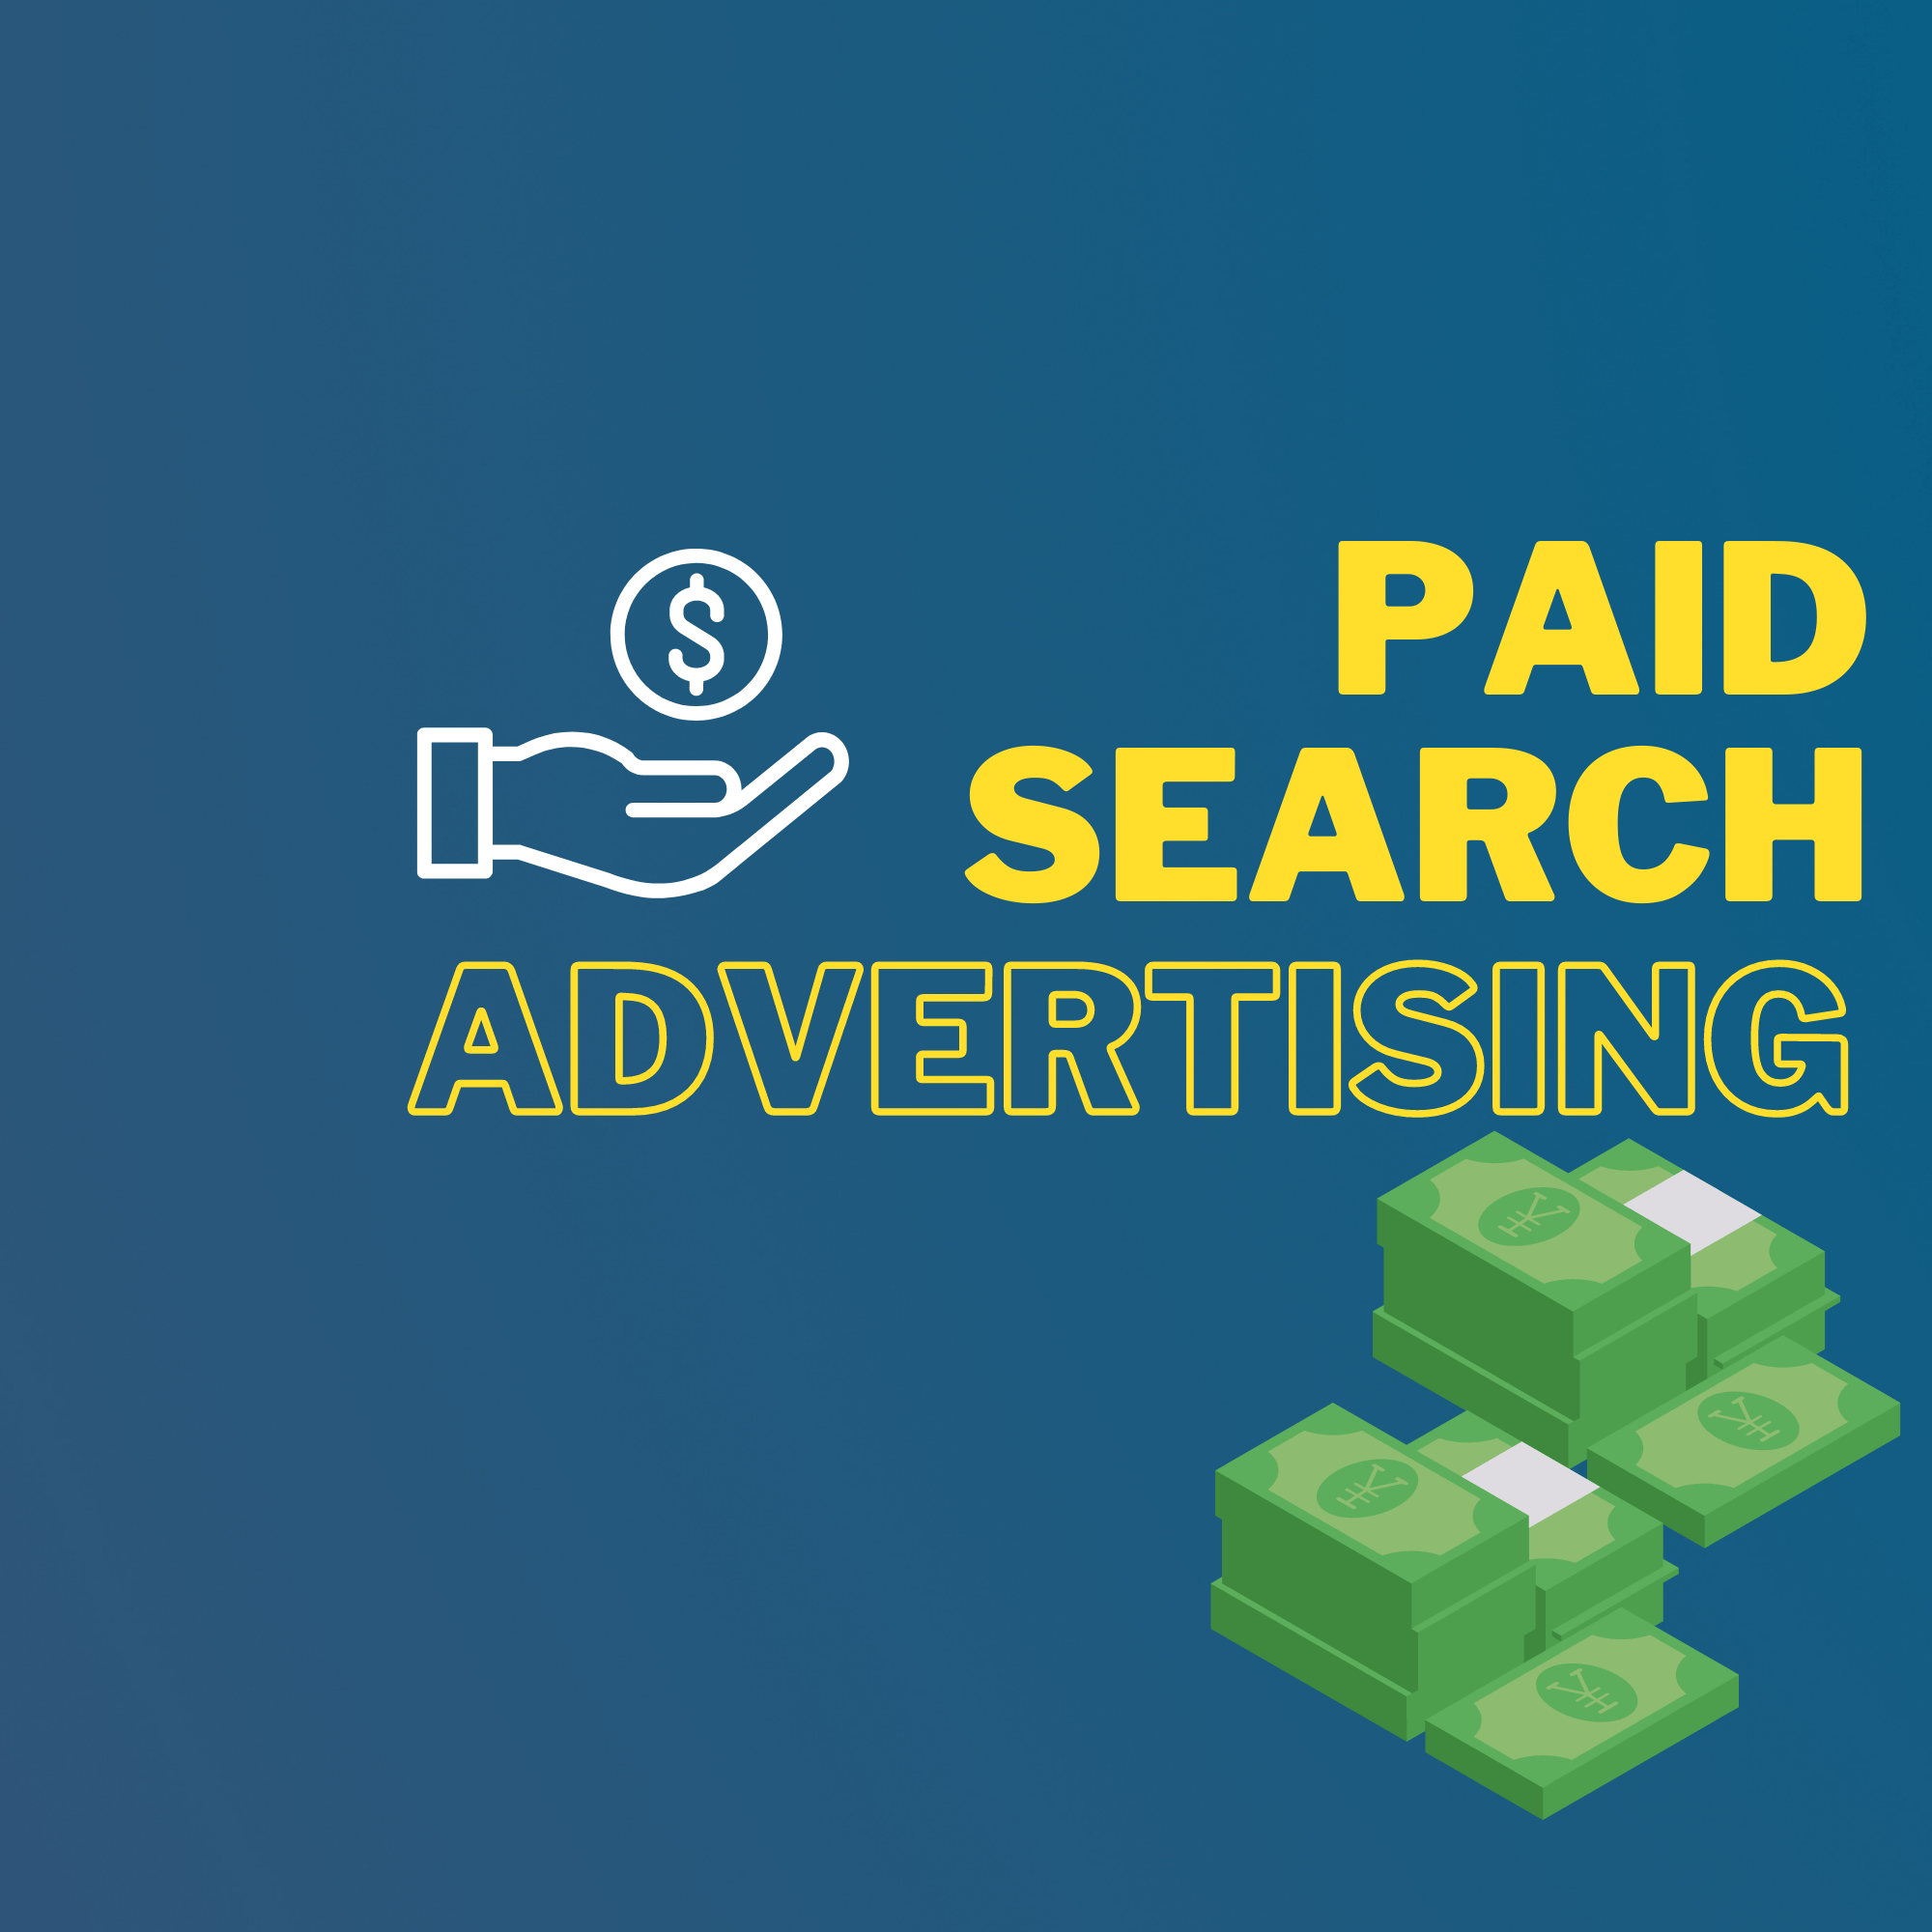 A BEGINNER’S GUIDE TO PAID SEARCH ADVERTISING WHY YOUR COMPETITORS USE